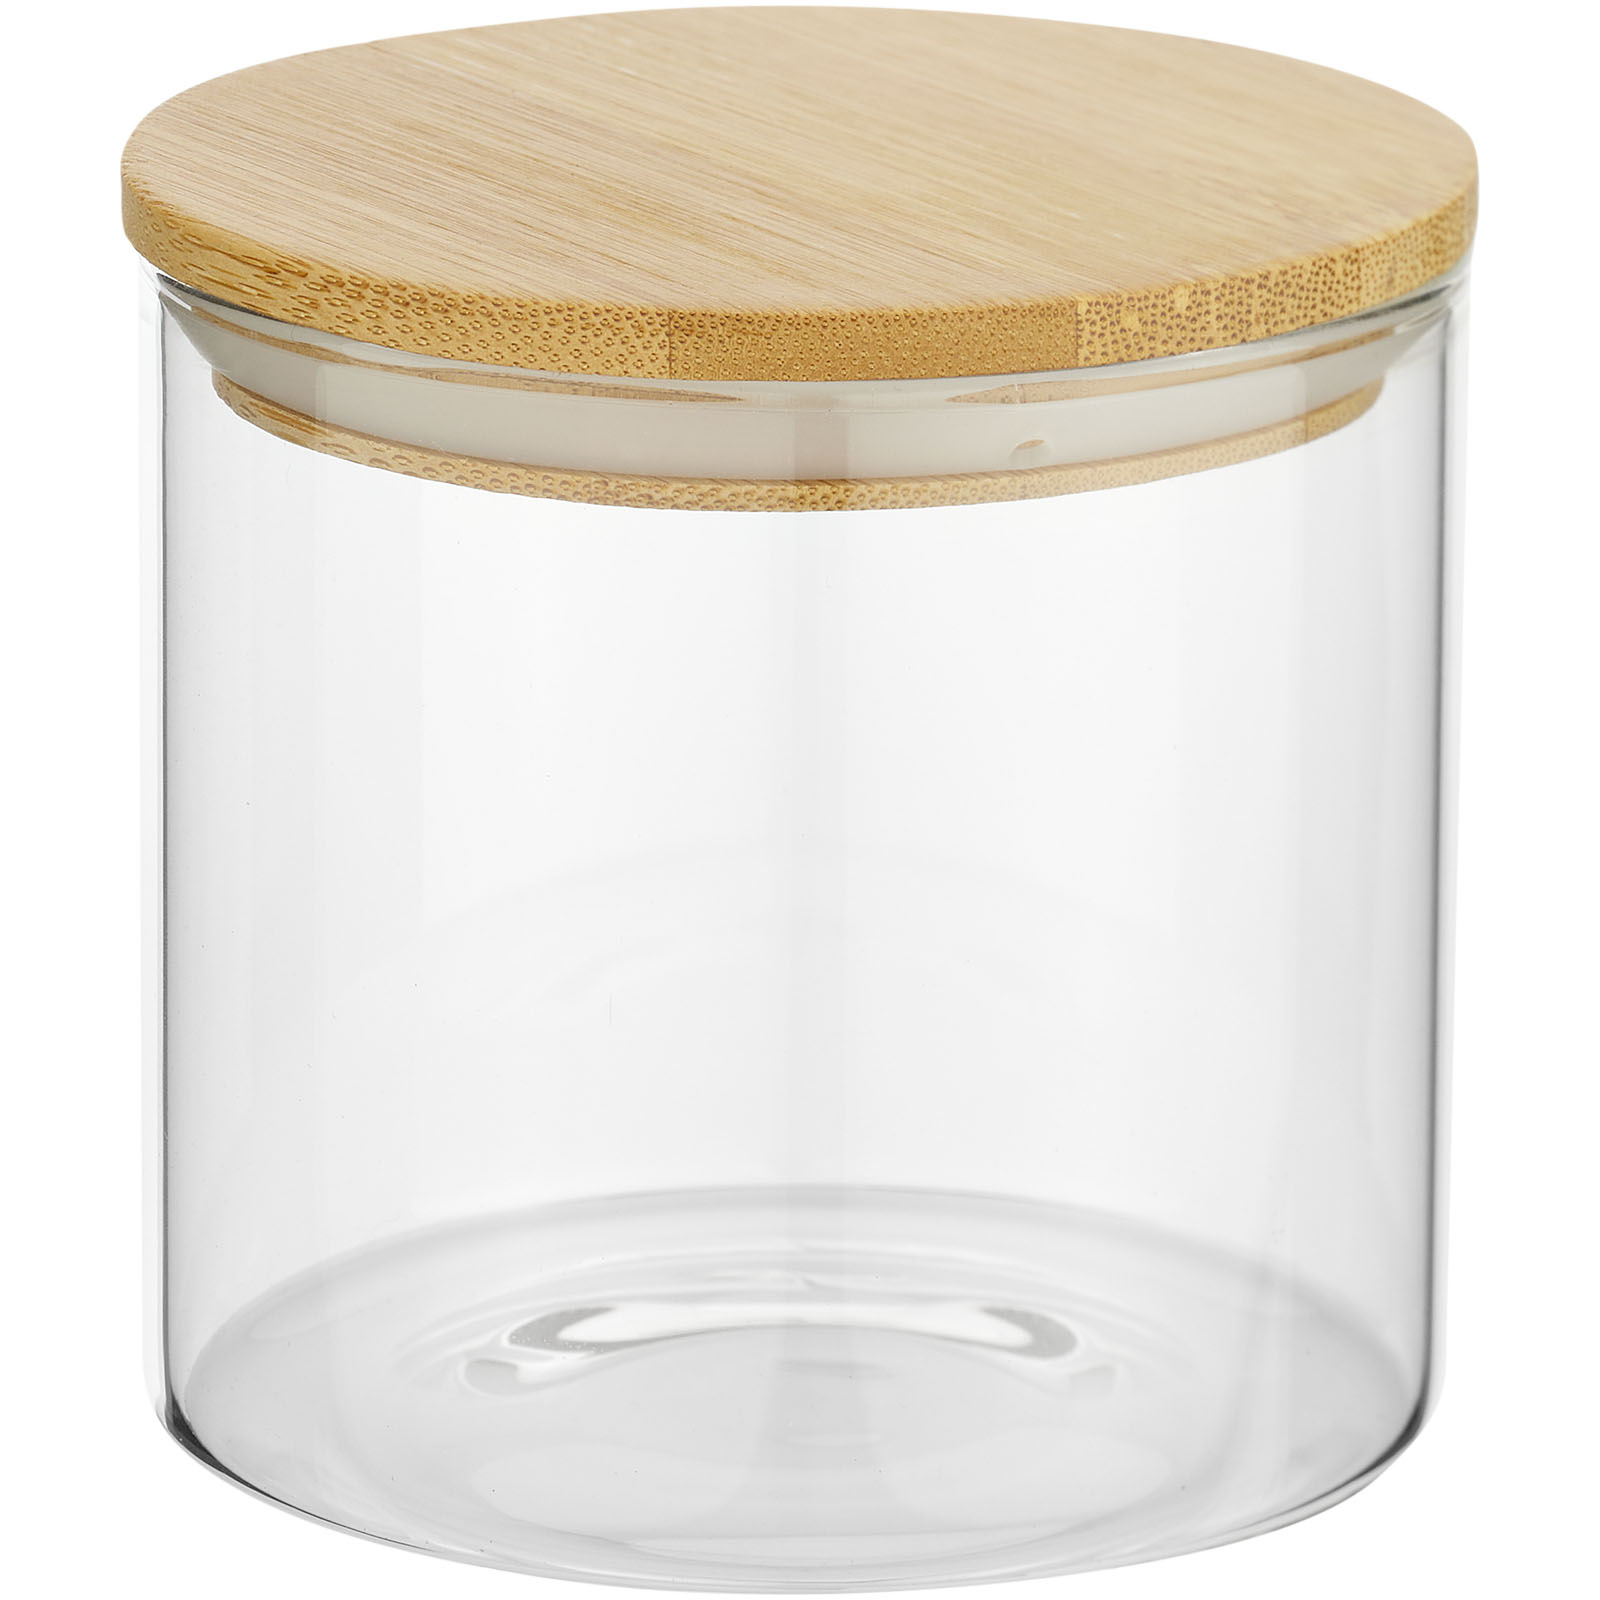 Advertising Kitchenware - Boley 320 ml glass food container